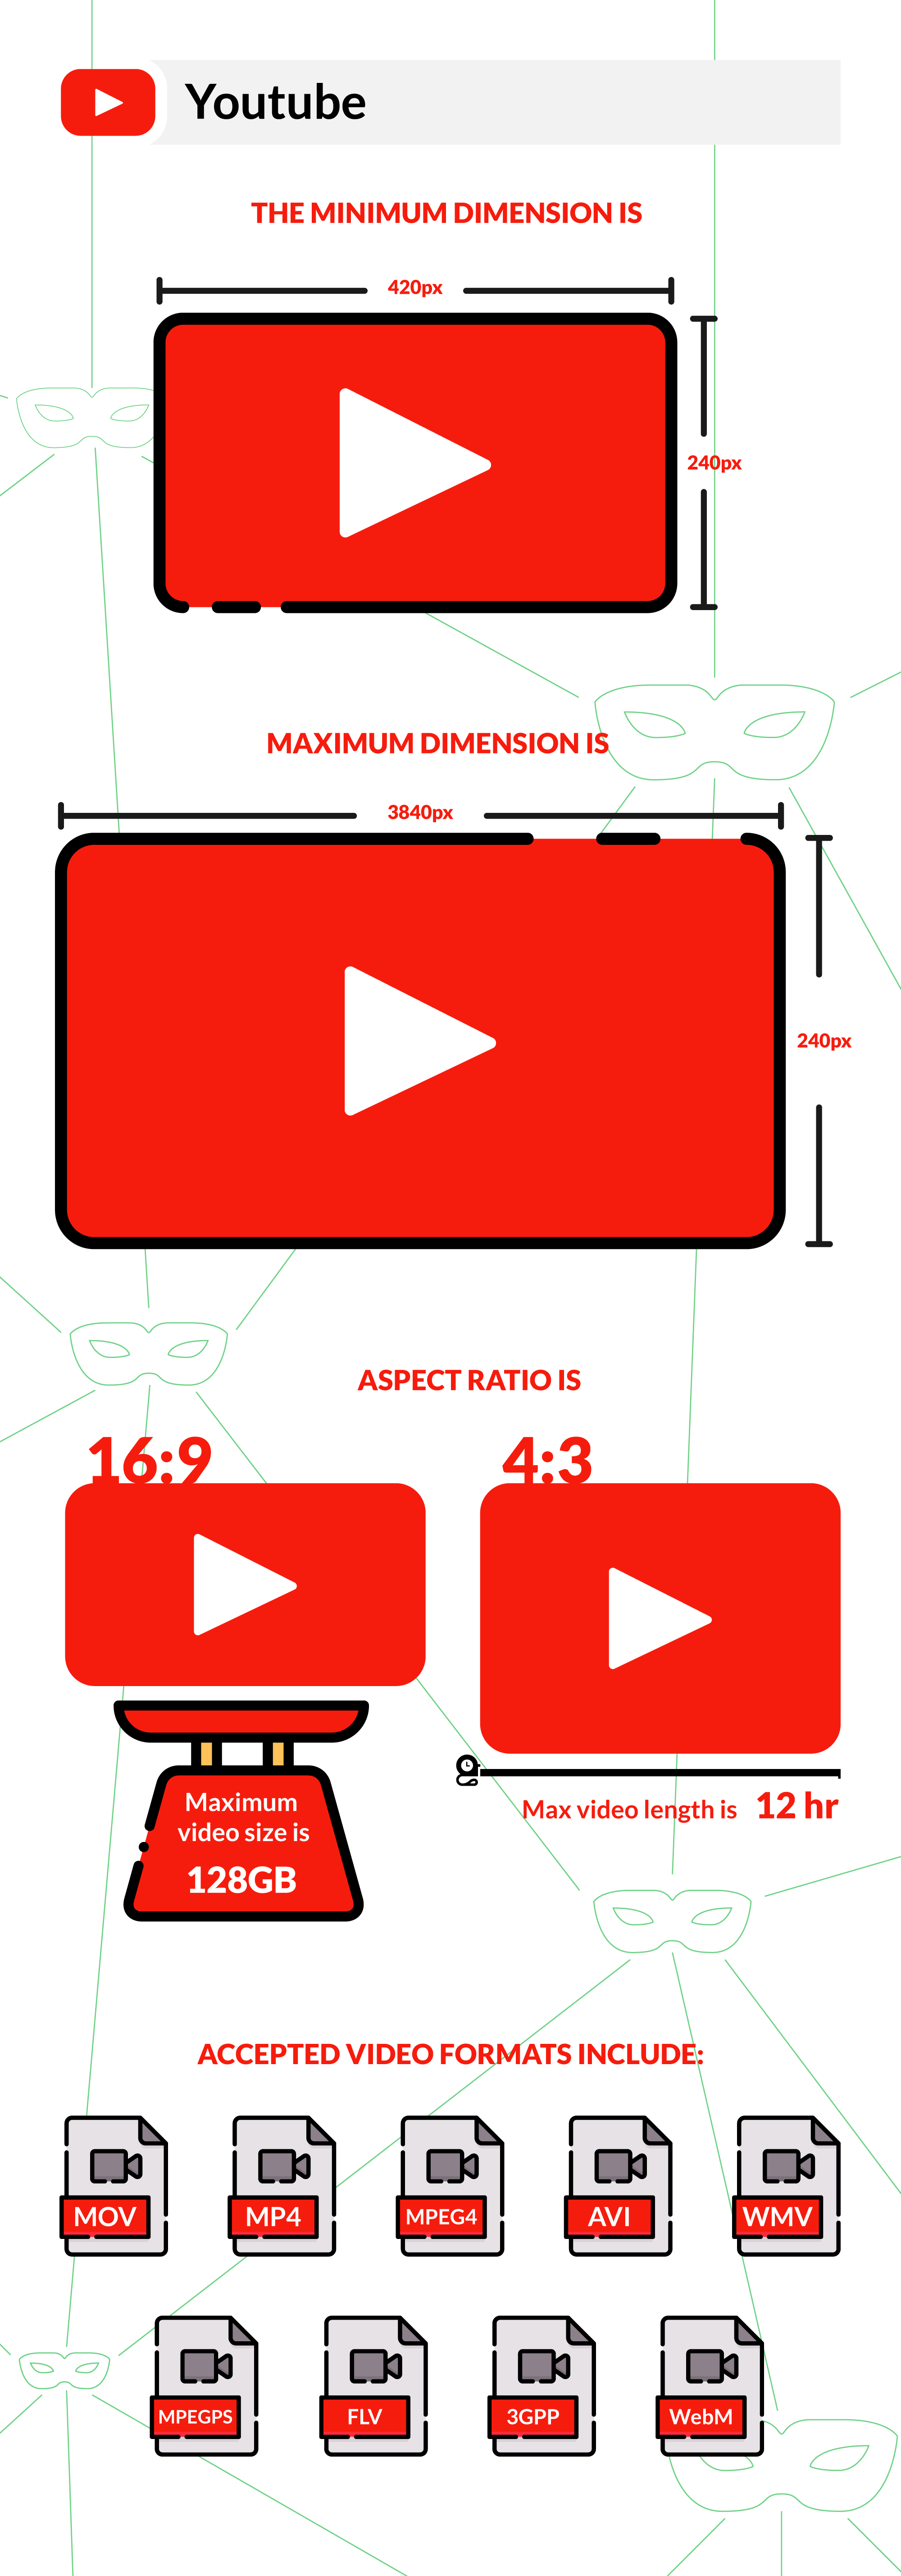 YouTube Video Sizes & Dimensions 2020 | Publer's Blog